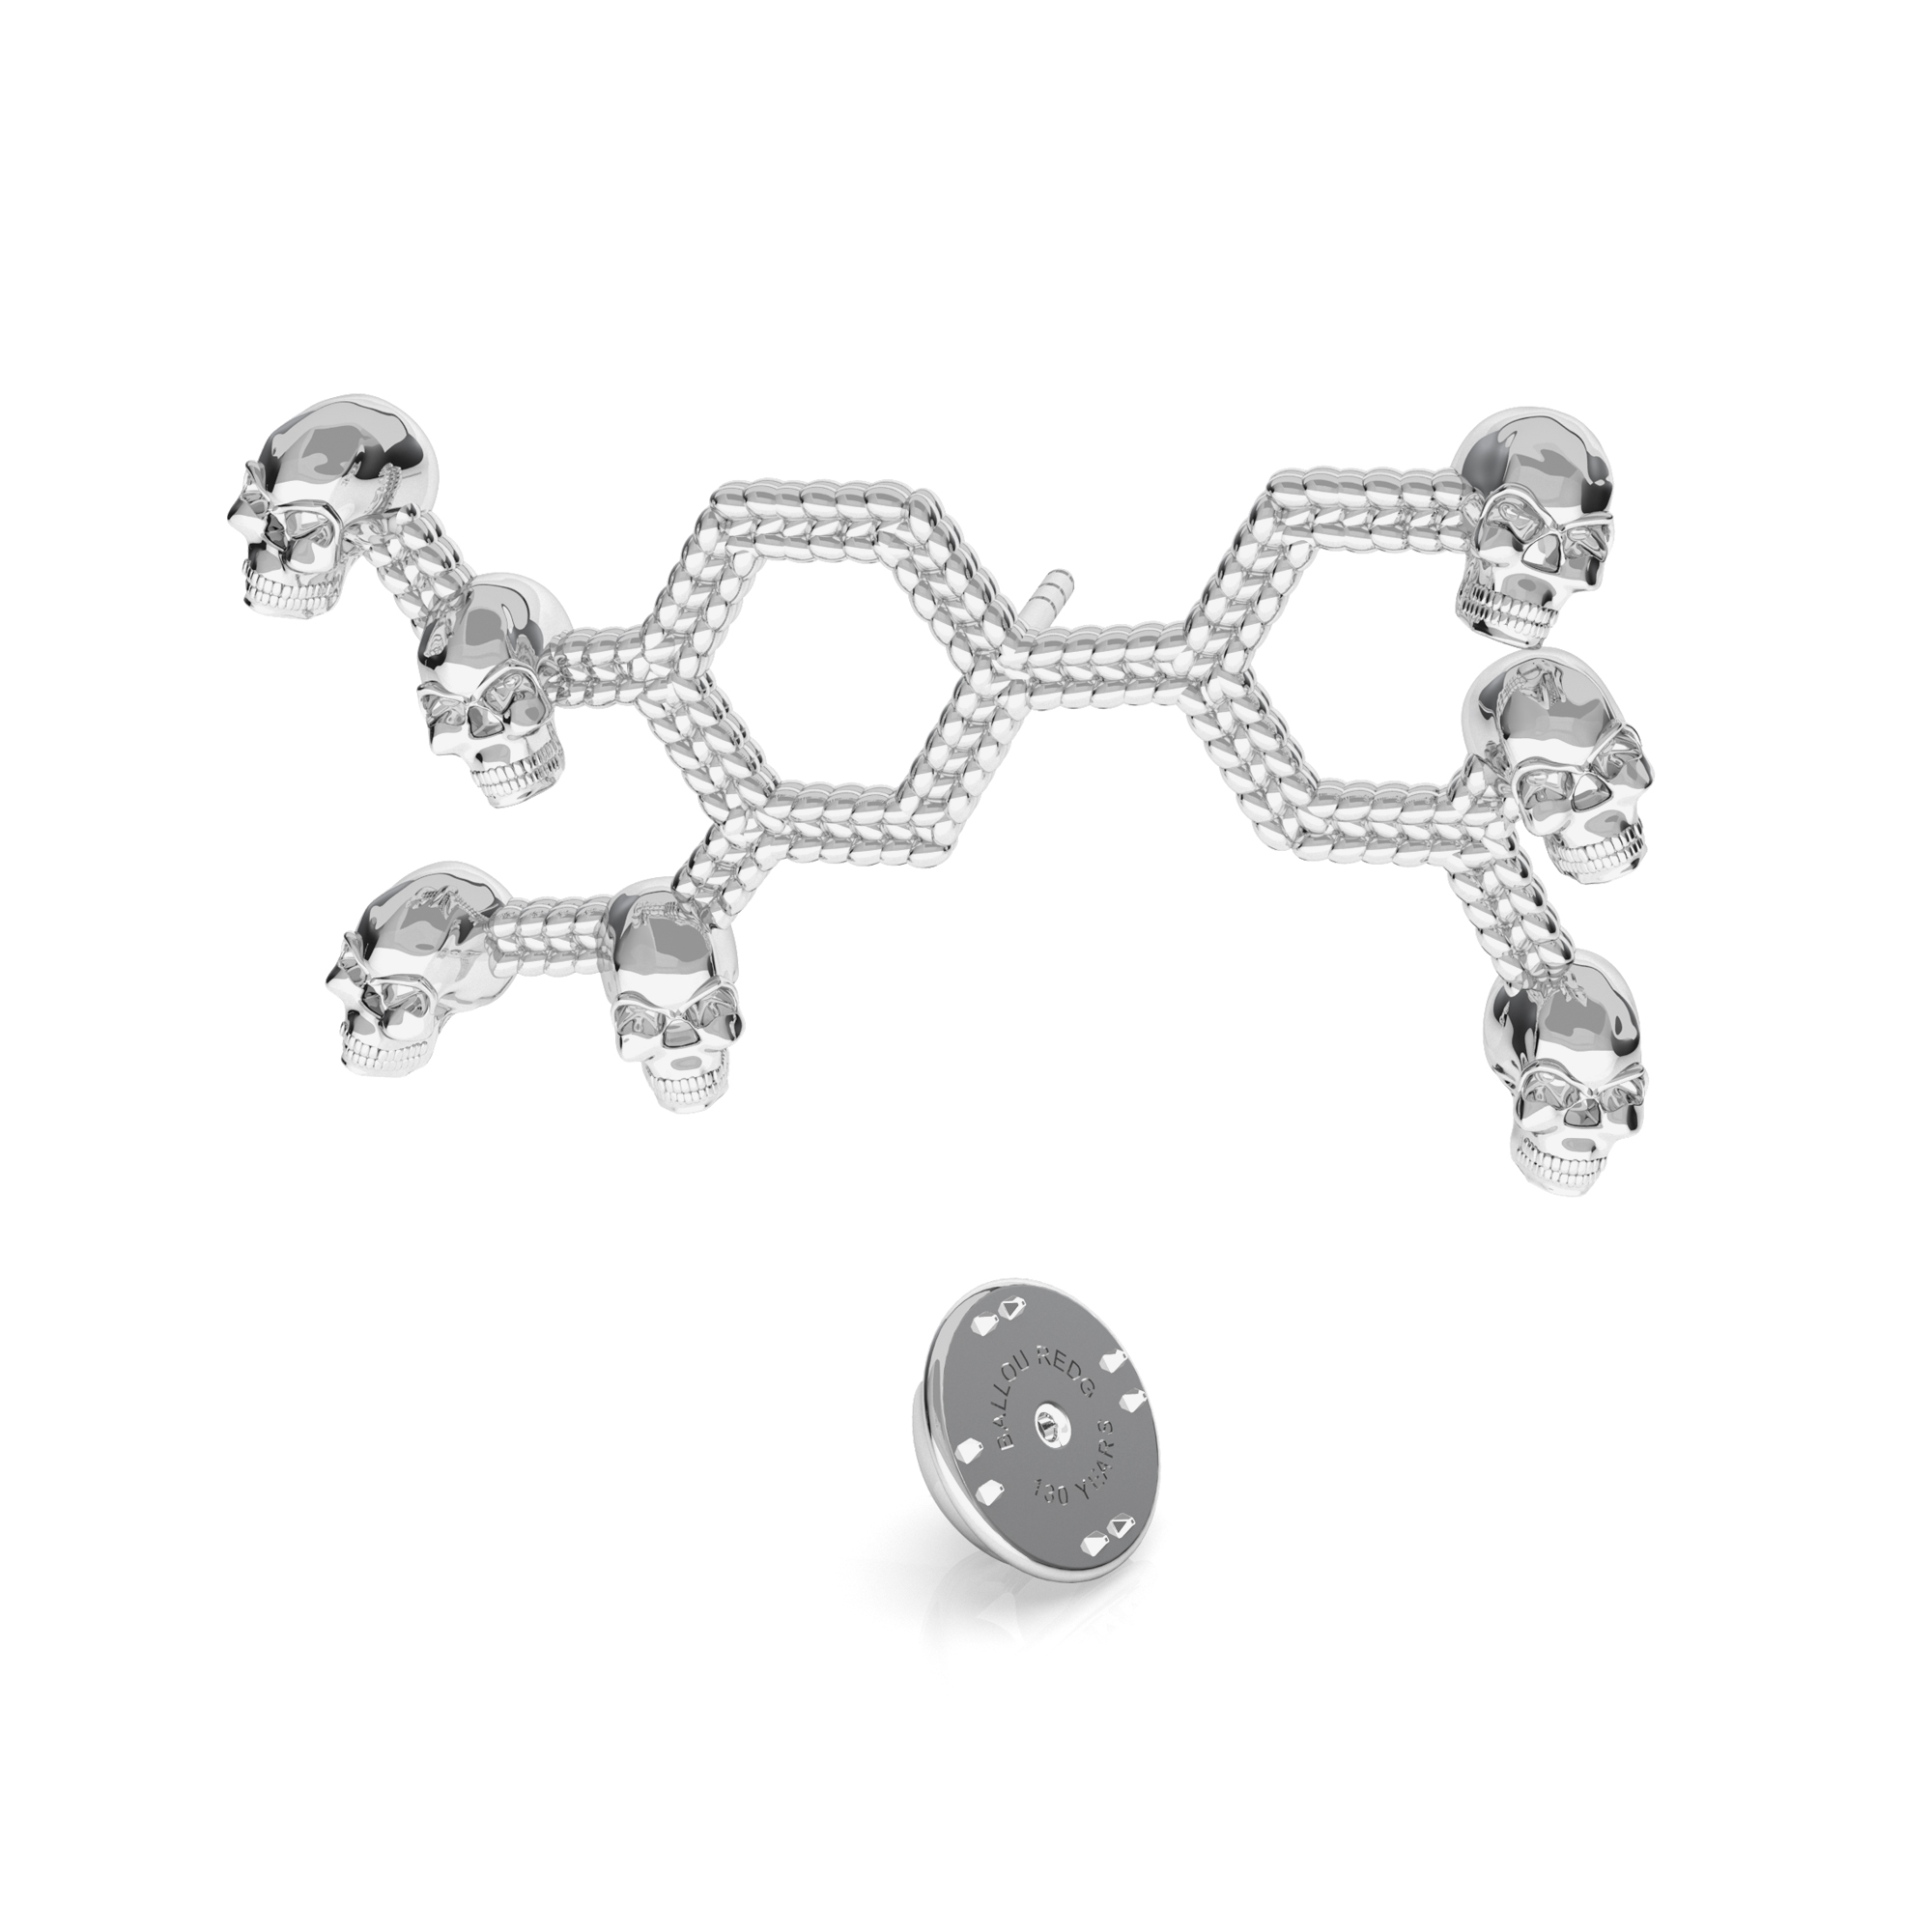 TESTOSTERONE CHEMICAL FOMULE LAPEL PIN 925